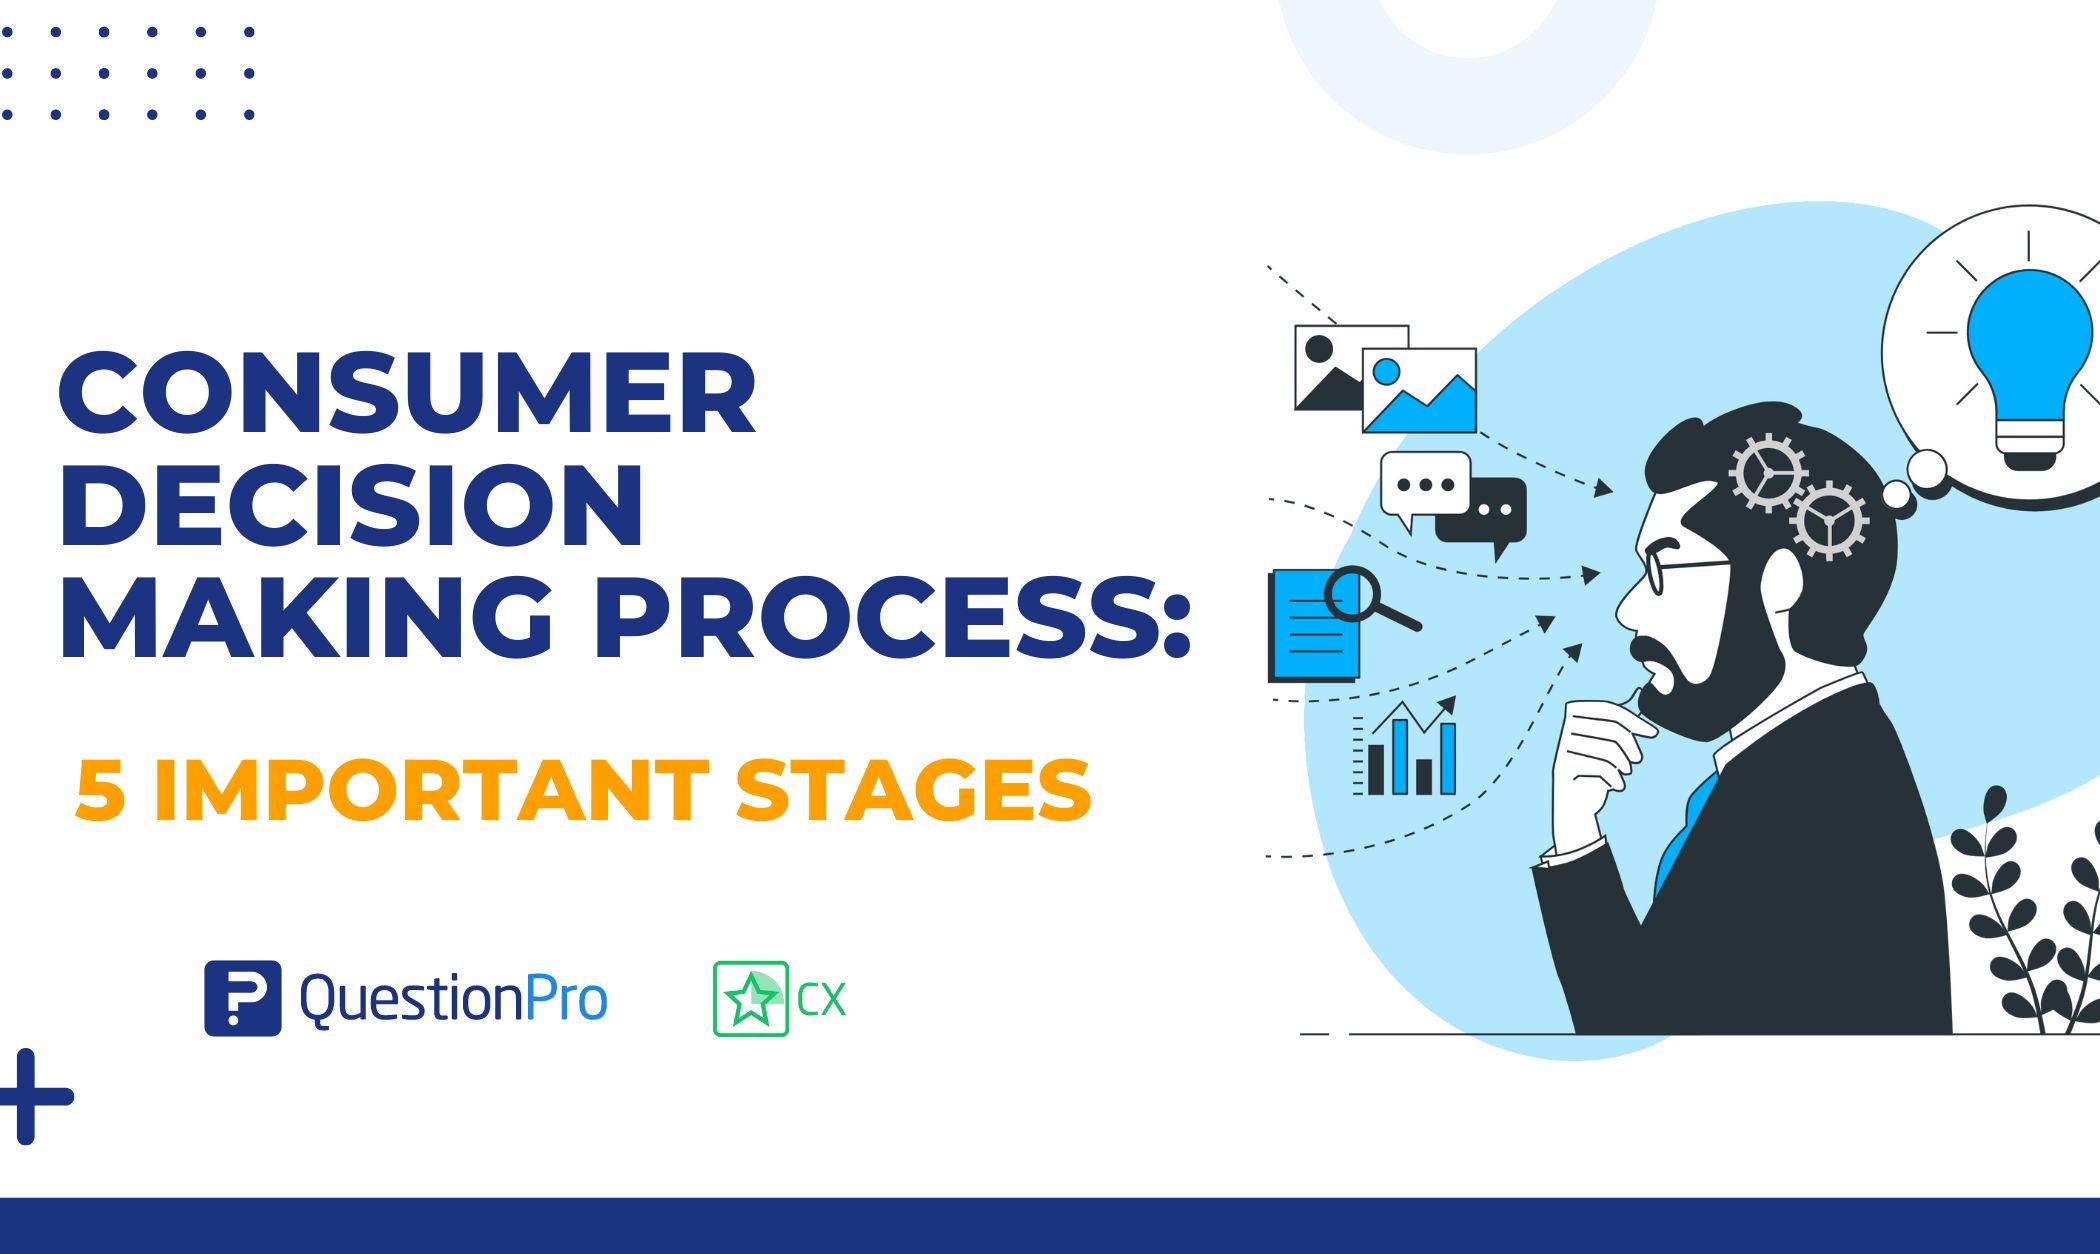 The consumer decision making process is a set of steps that the consumer goes through. There are 5 stages in how a consumer makes a decision.